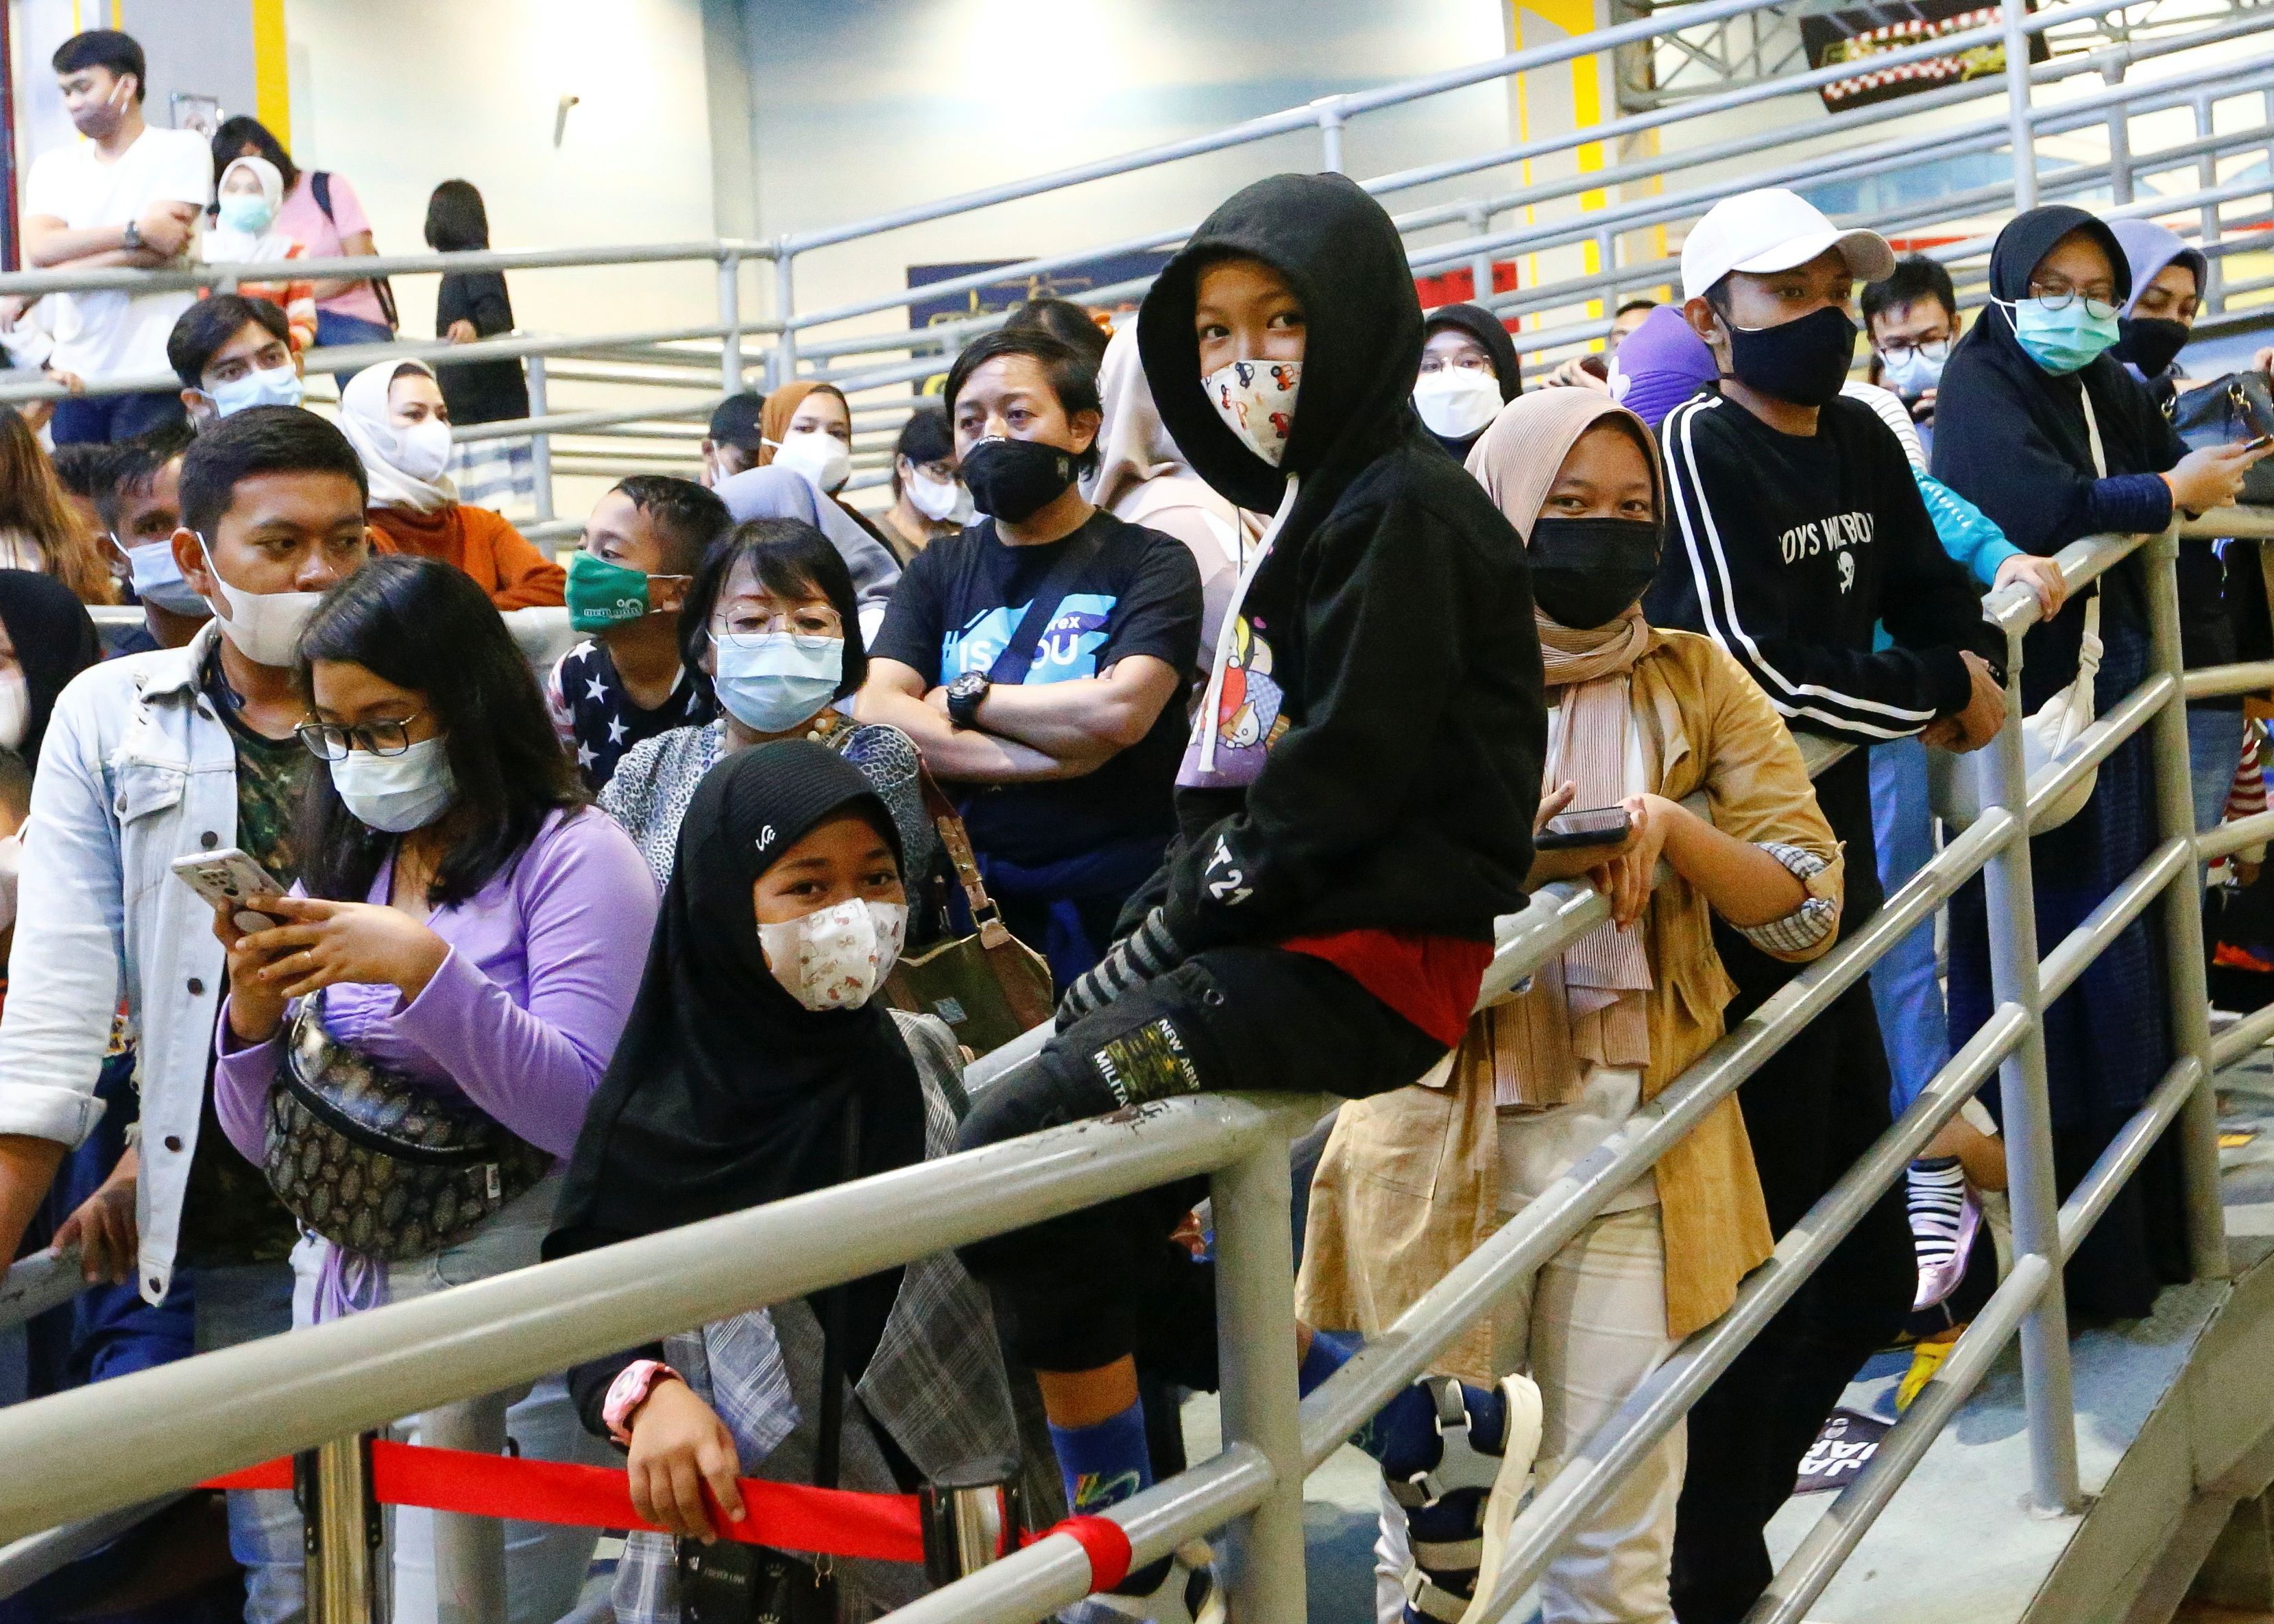 People wearing protective face masks wait for their turn to ride go-karts at Trans Studio, in Jakarta